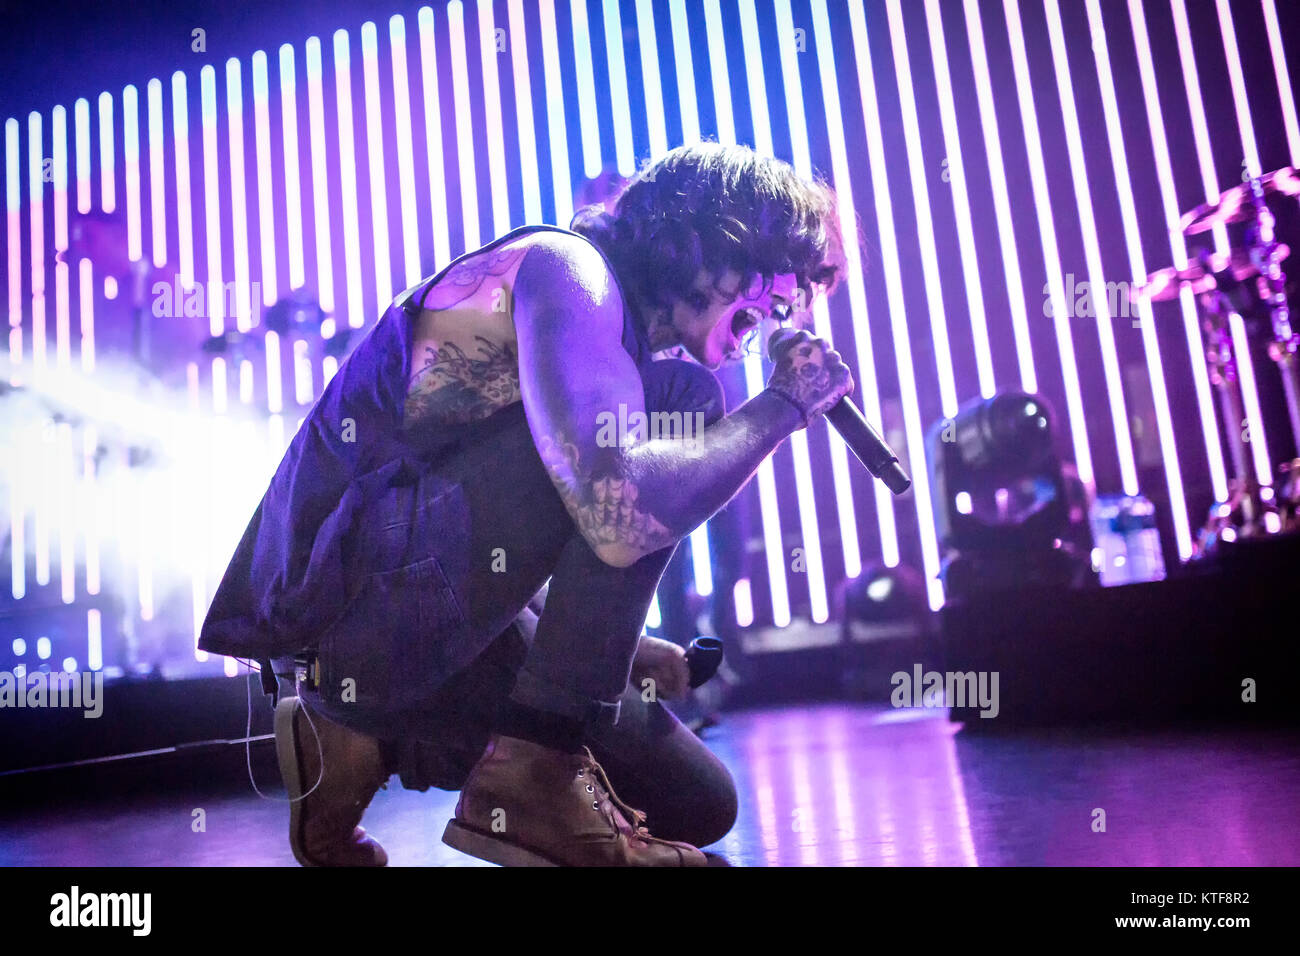 Bring Me The Horizon, the British metal core band, performs a live concert at Rockefeller in Oslo. Here vocalist Oliver Sykes is pictured live on stage. Norway, 13/11 2015. Stock Photo